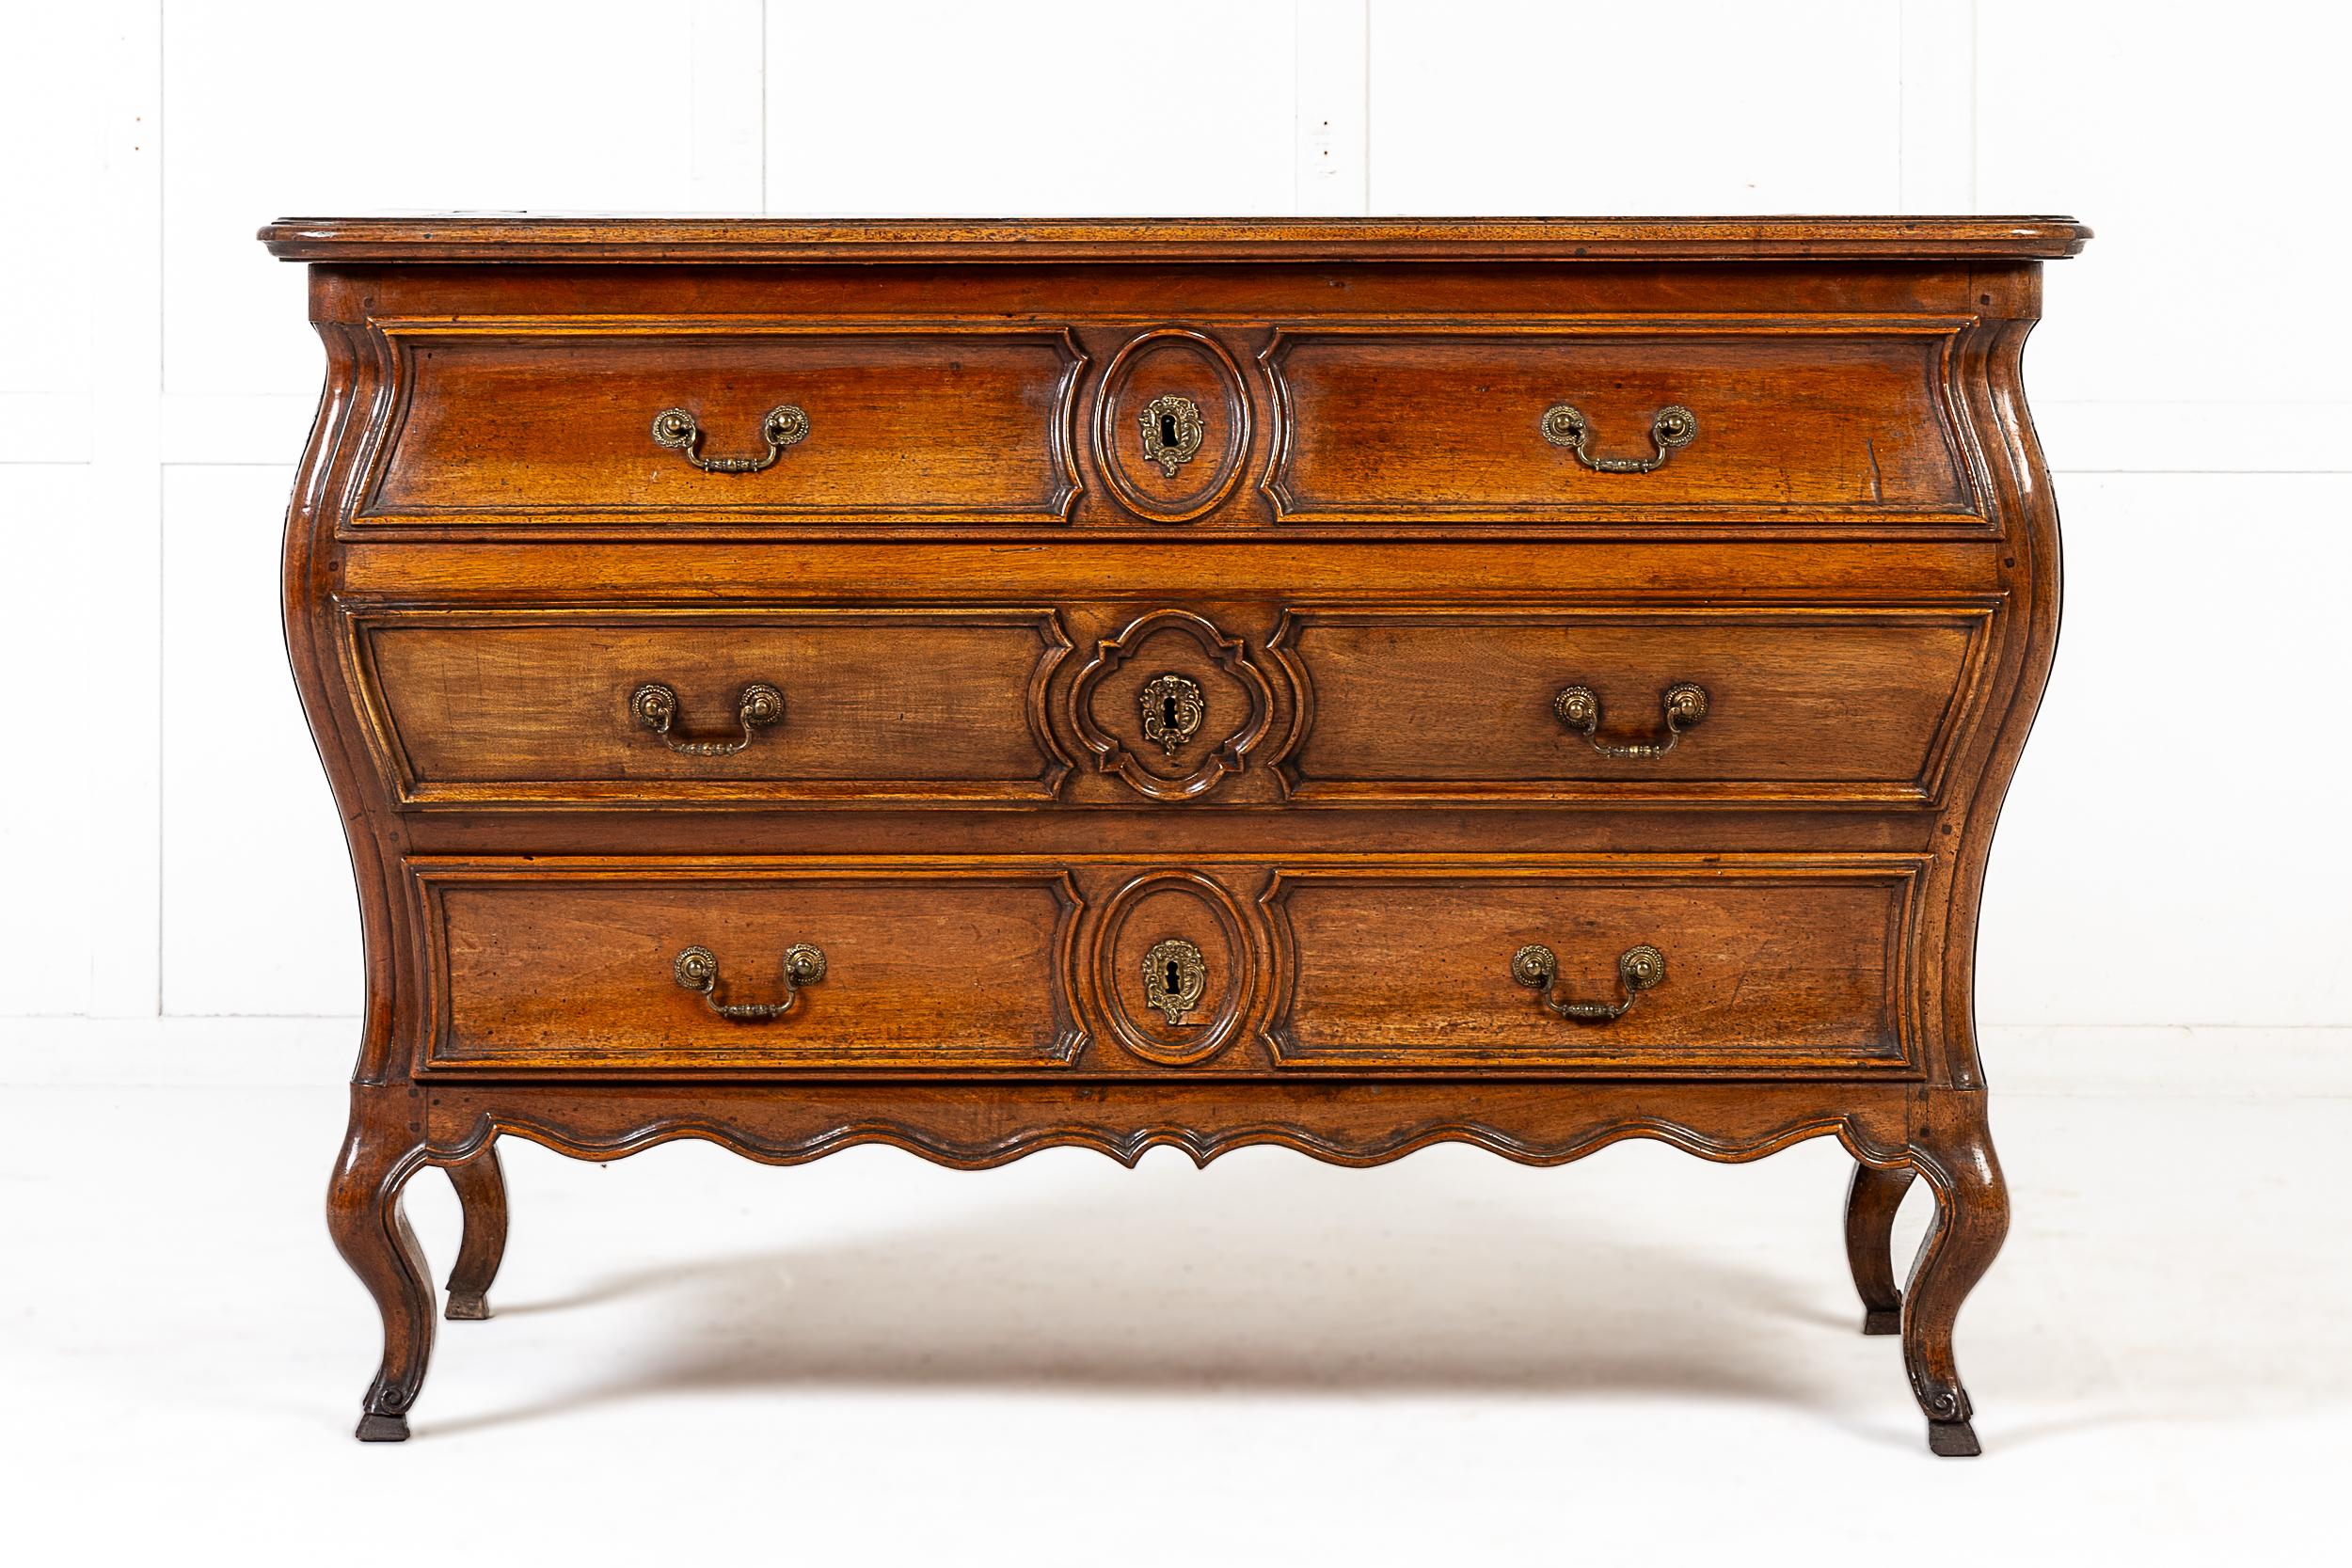 A Fine 18th Century French Provincial Louis XV Period Walnut Bombe Form Commode with Handsomely Inlaid Parquetry Top.

The Walnut commode of bombe form, but with an unusual rectangular top, inlaid with a starburst design in contrasting woods. The